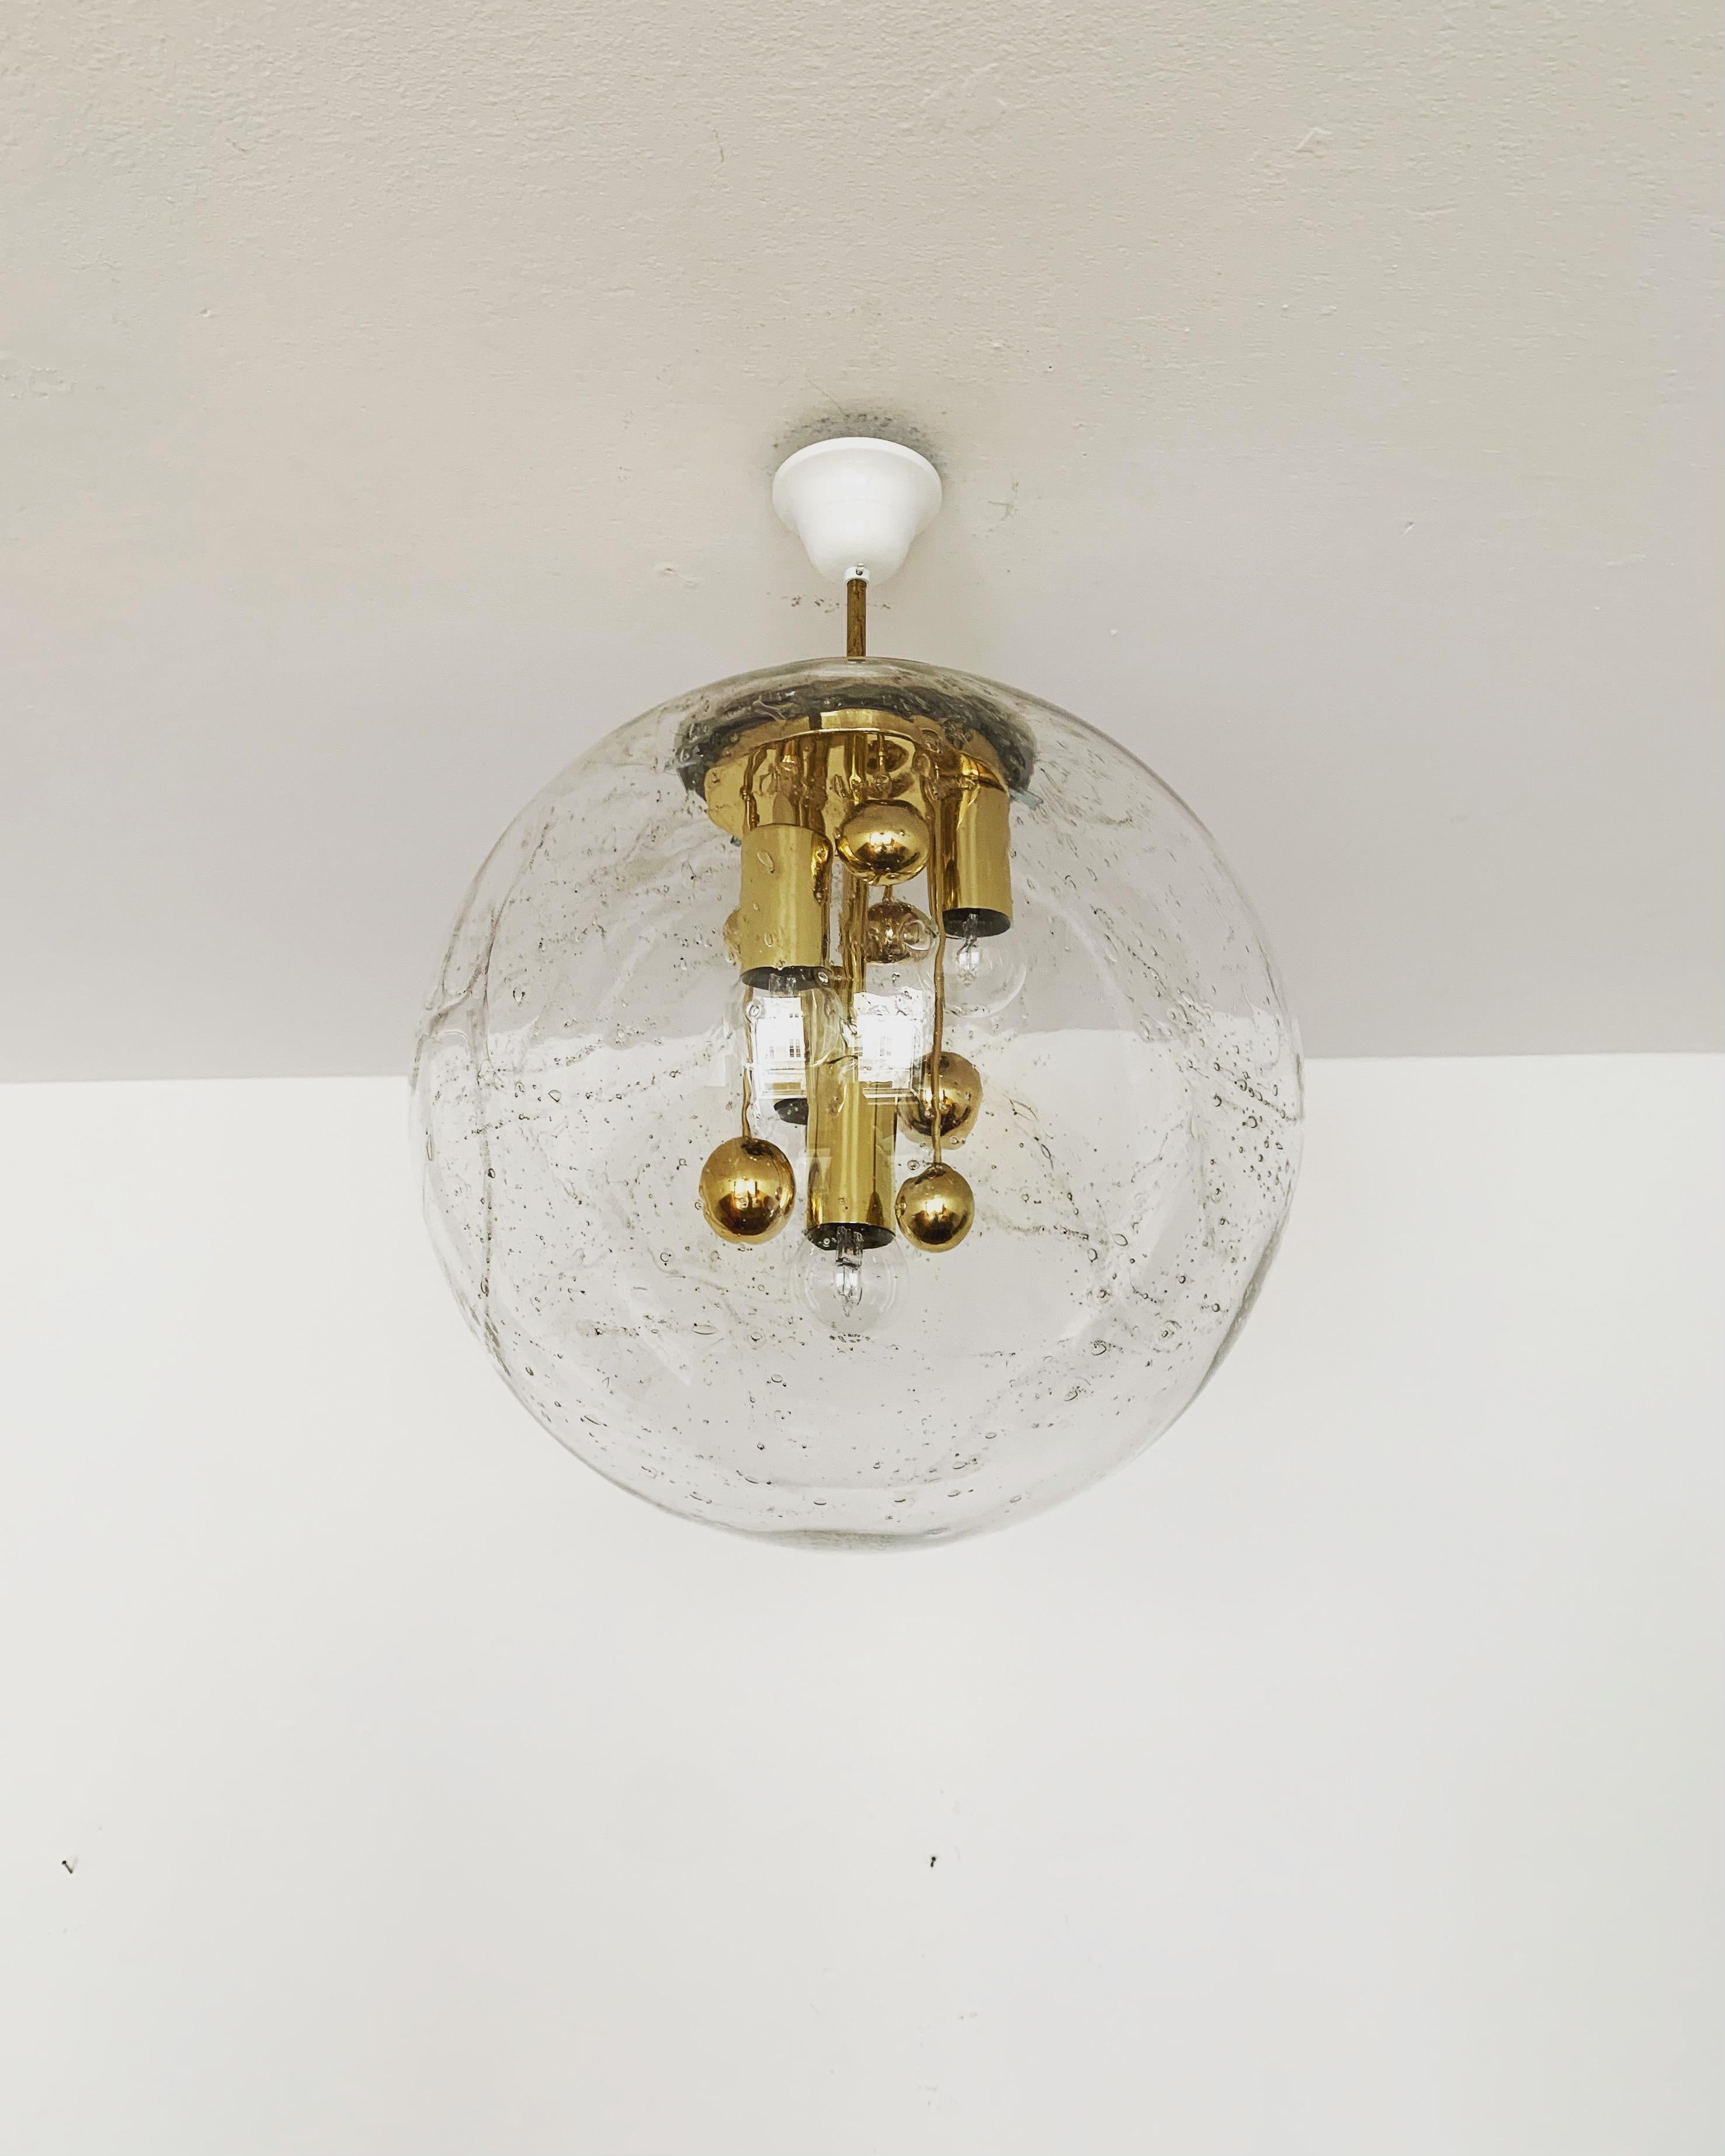 Very beautiful and large golden Big Ball lamp by Doria from the 1960s.
Very elegant Hollywood Regency design with a fantastically glamorous look.
The structure in the glass creates a very sparkling light.

Manufacturer: